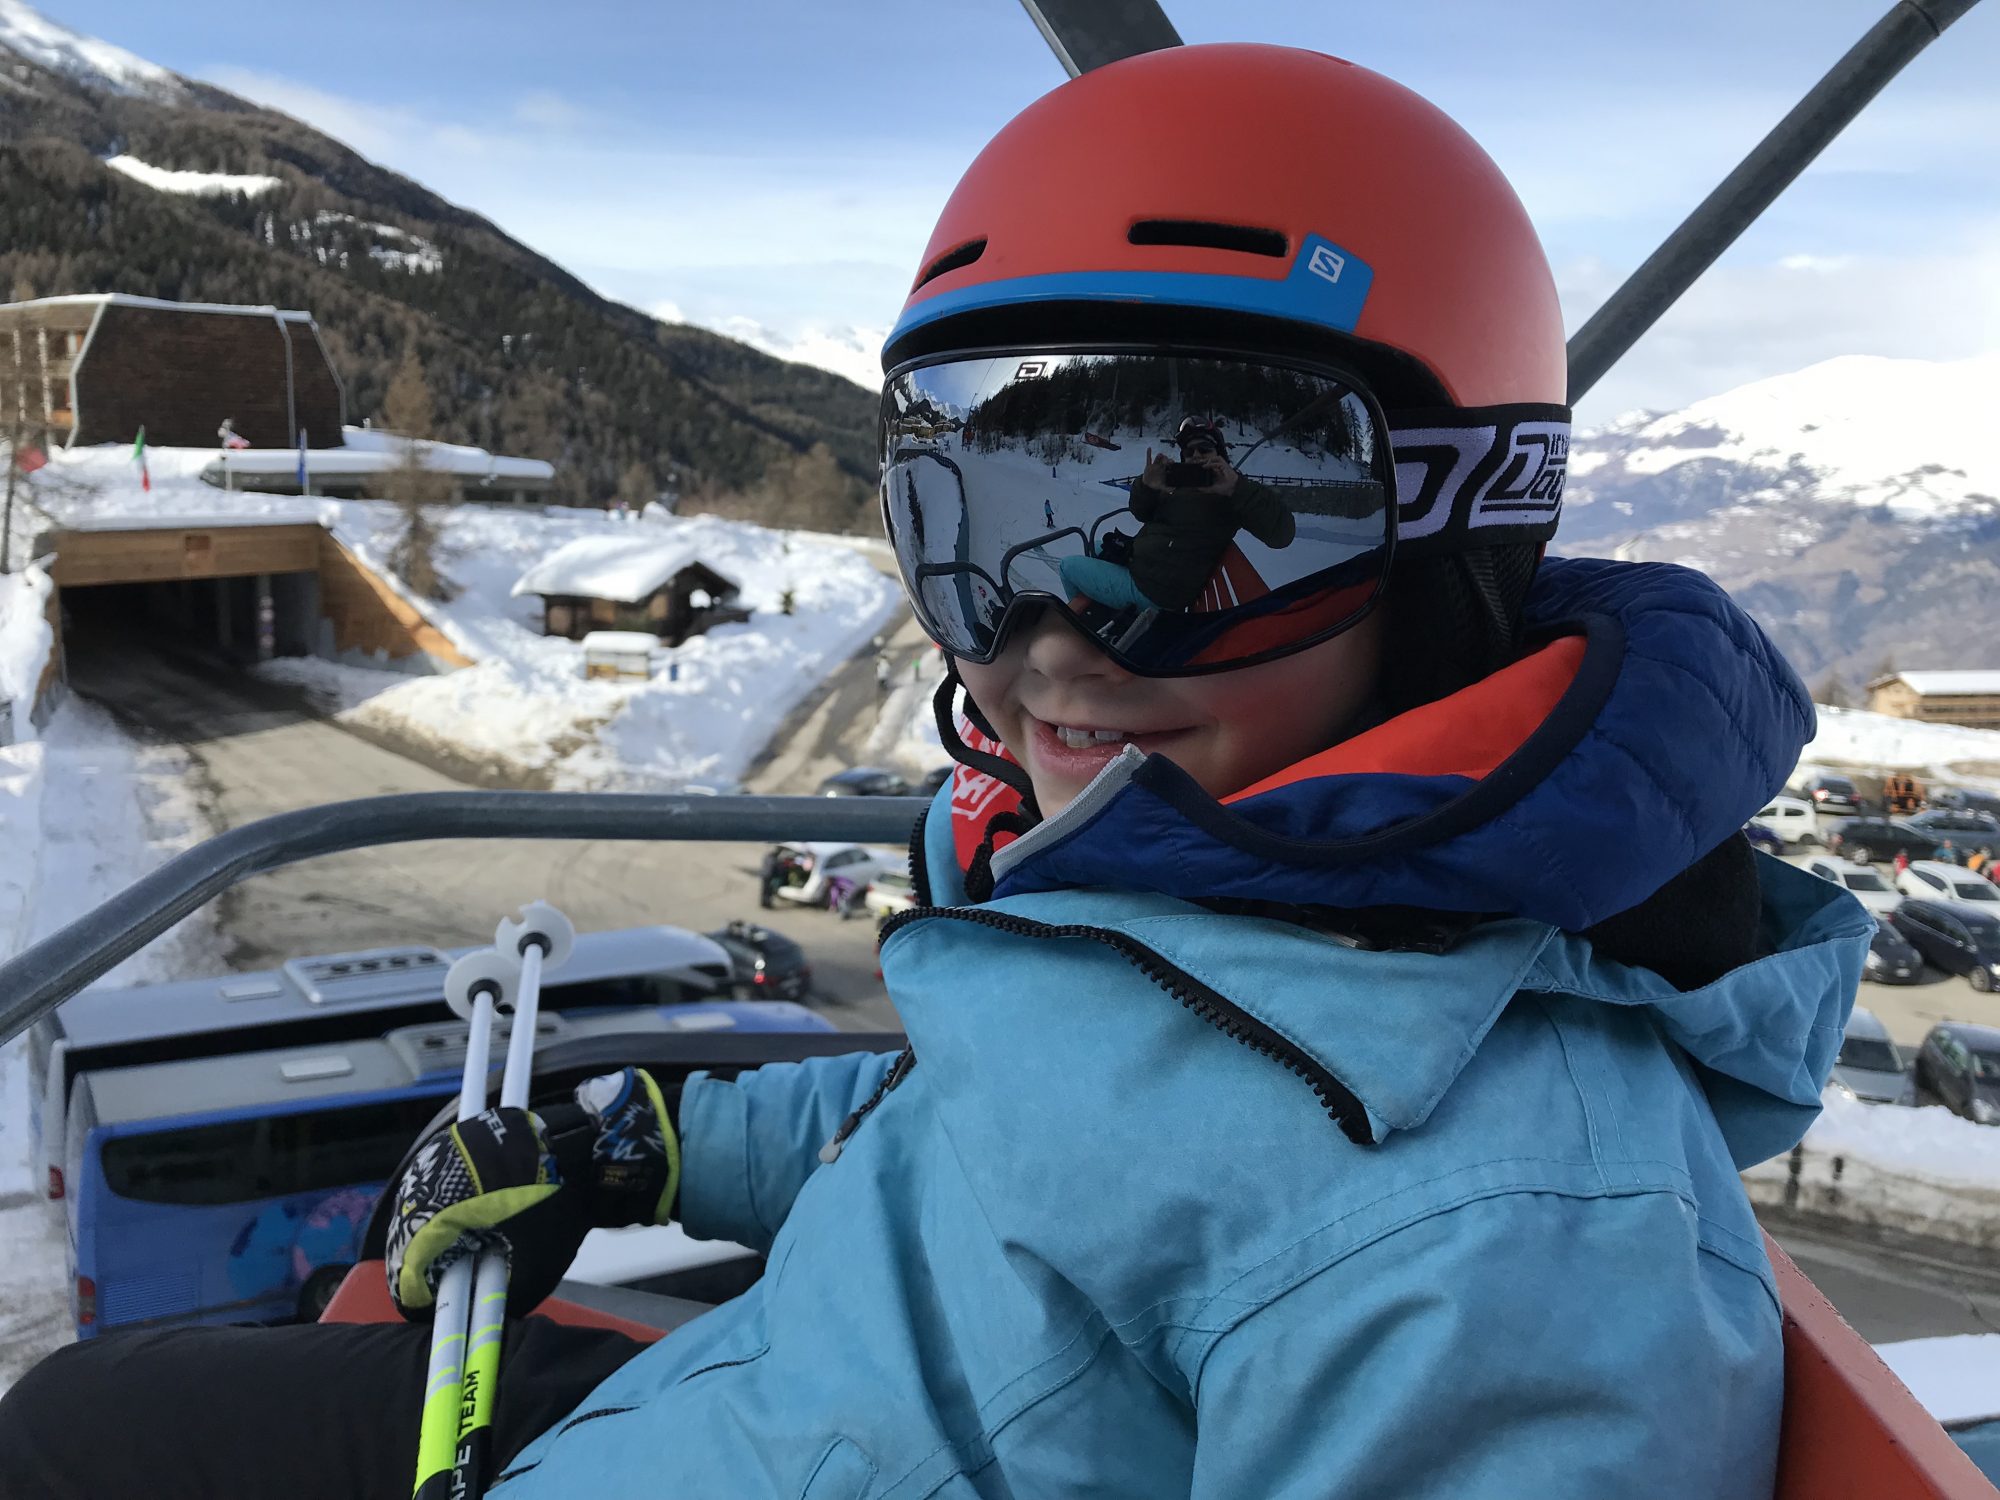 My eldest riding up the chairlift- Photo by The-Ski-Guru.